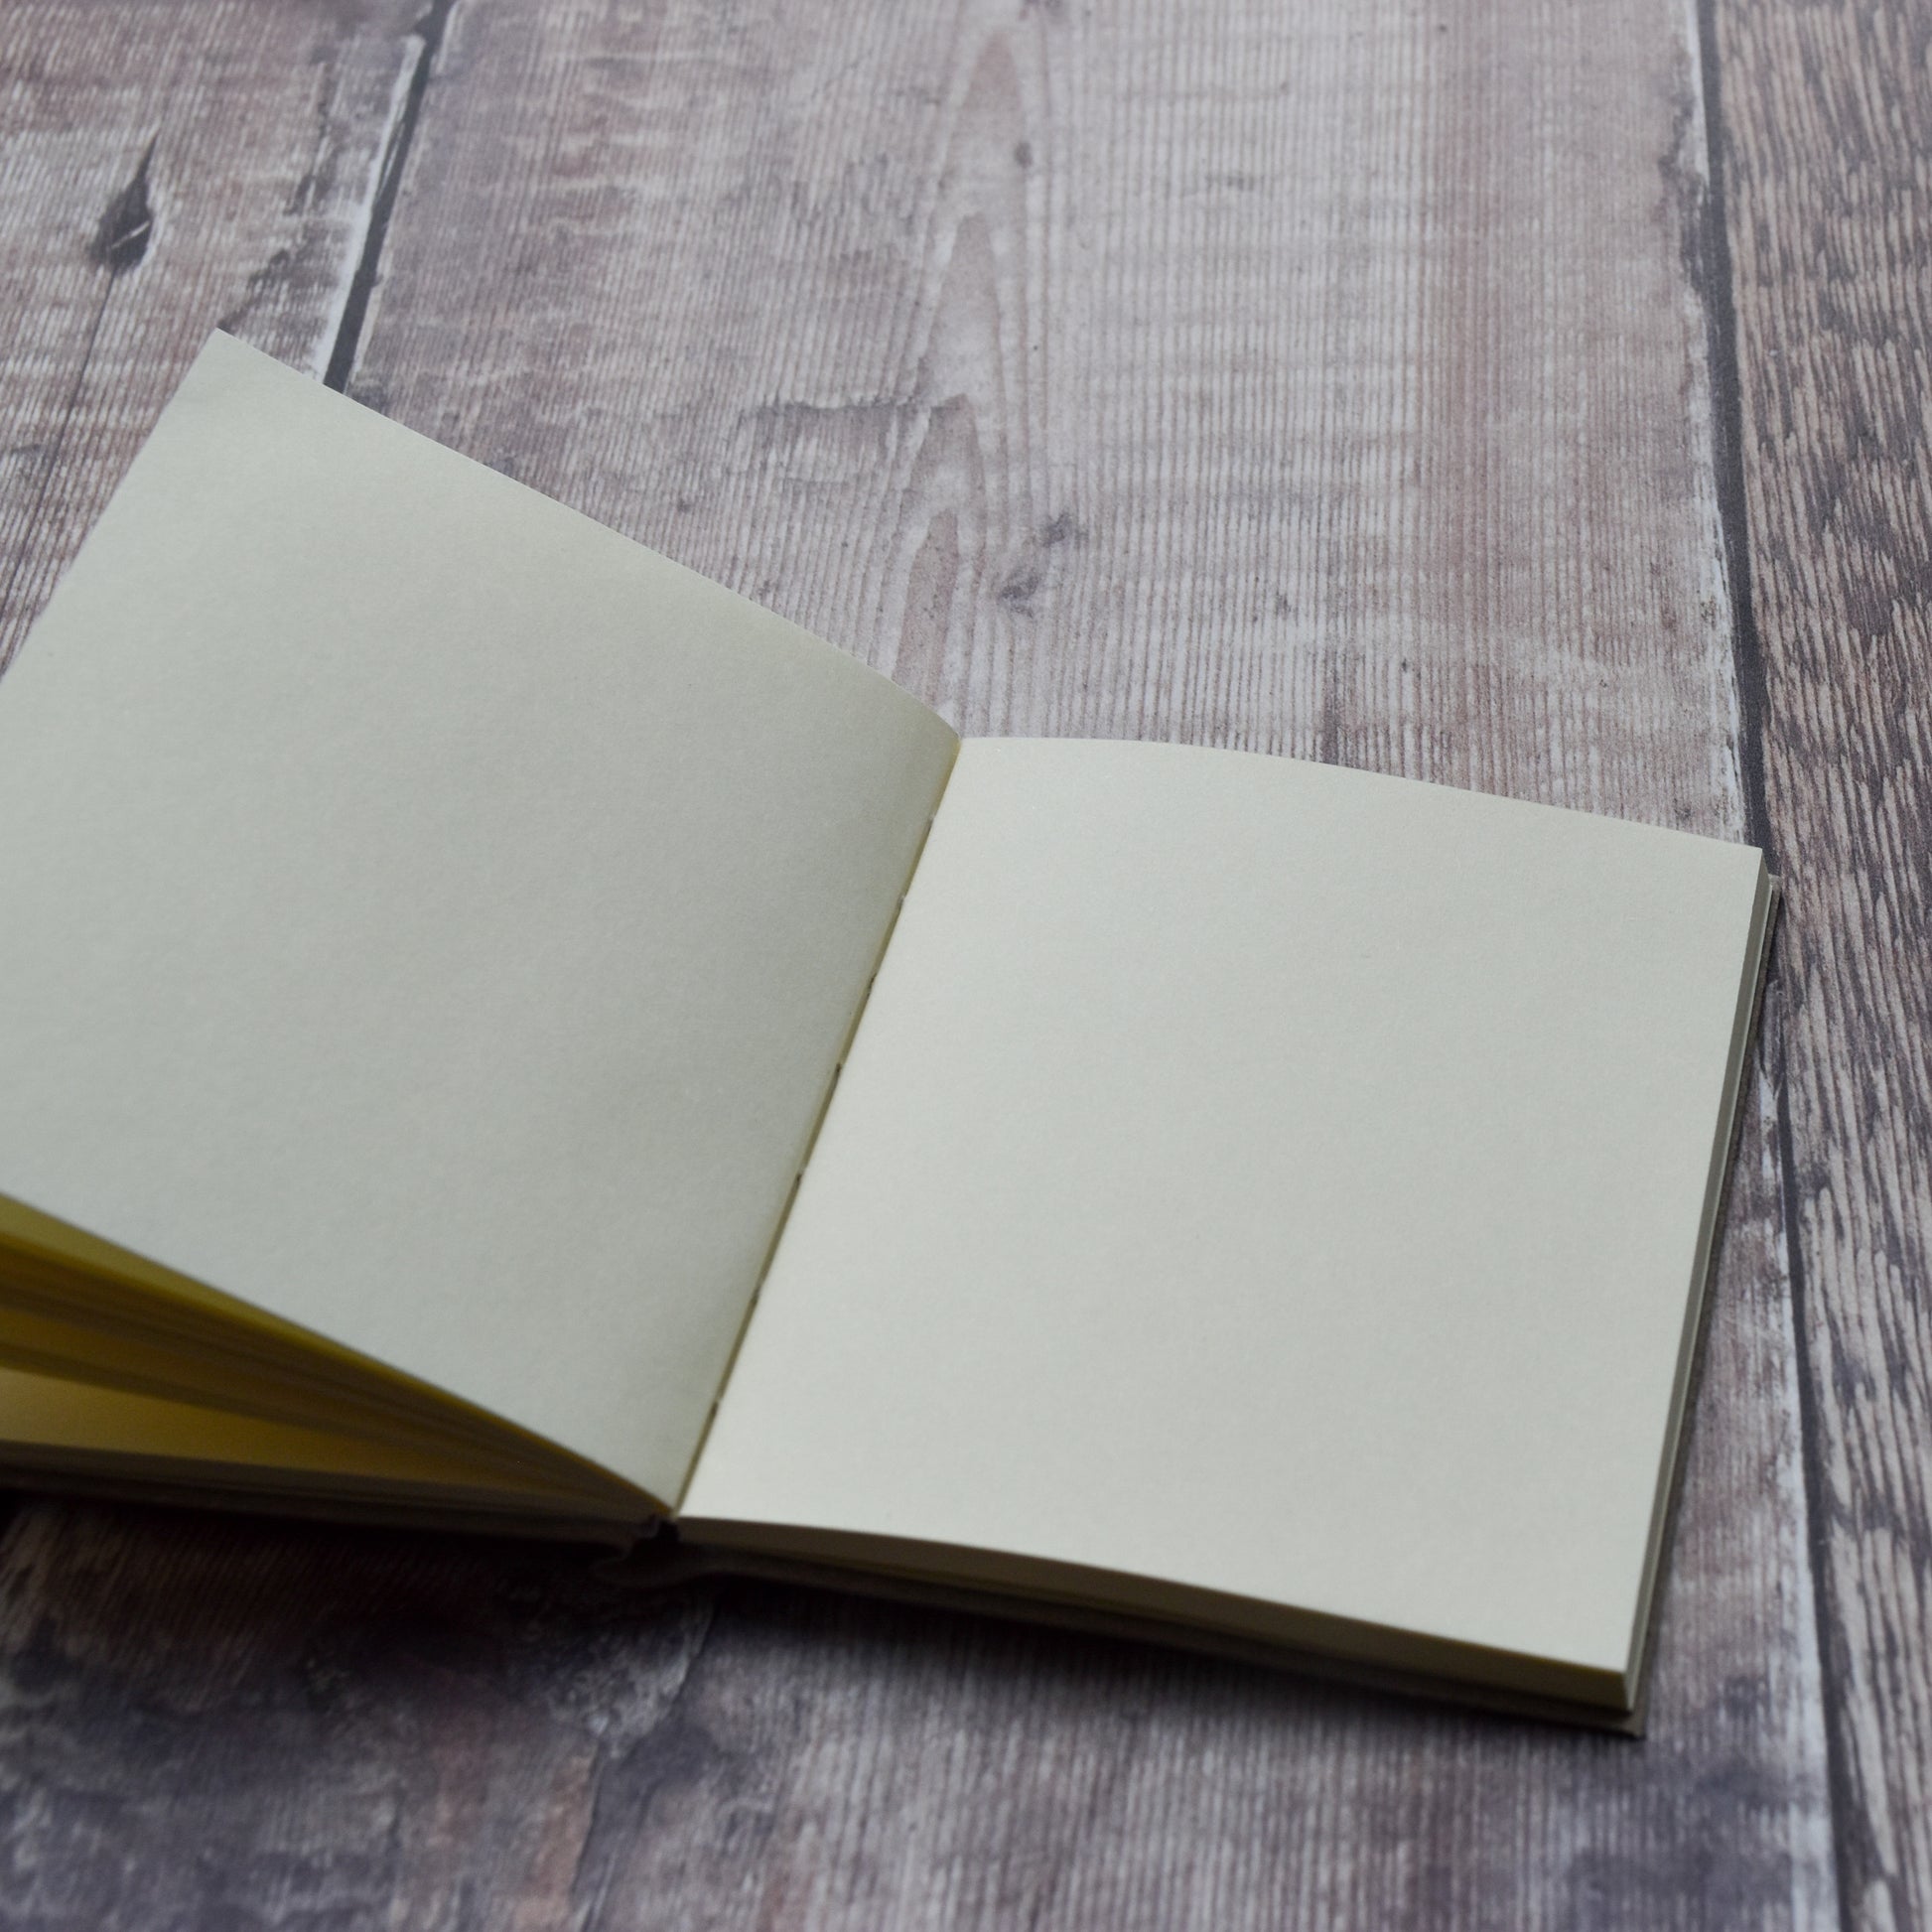 The Graduation Day Notebook open to a blank page on a grey wooden background.